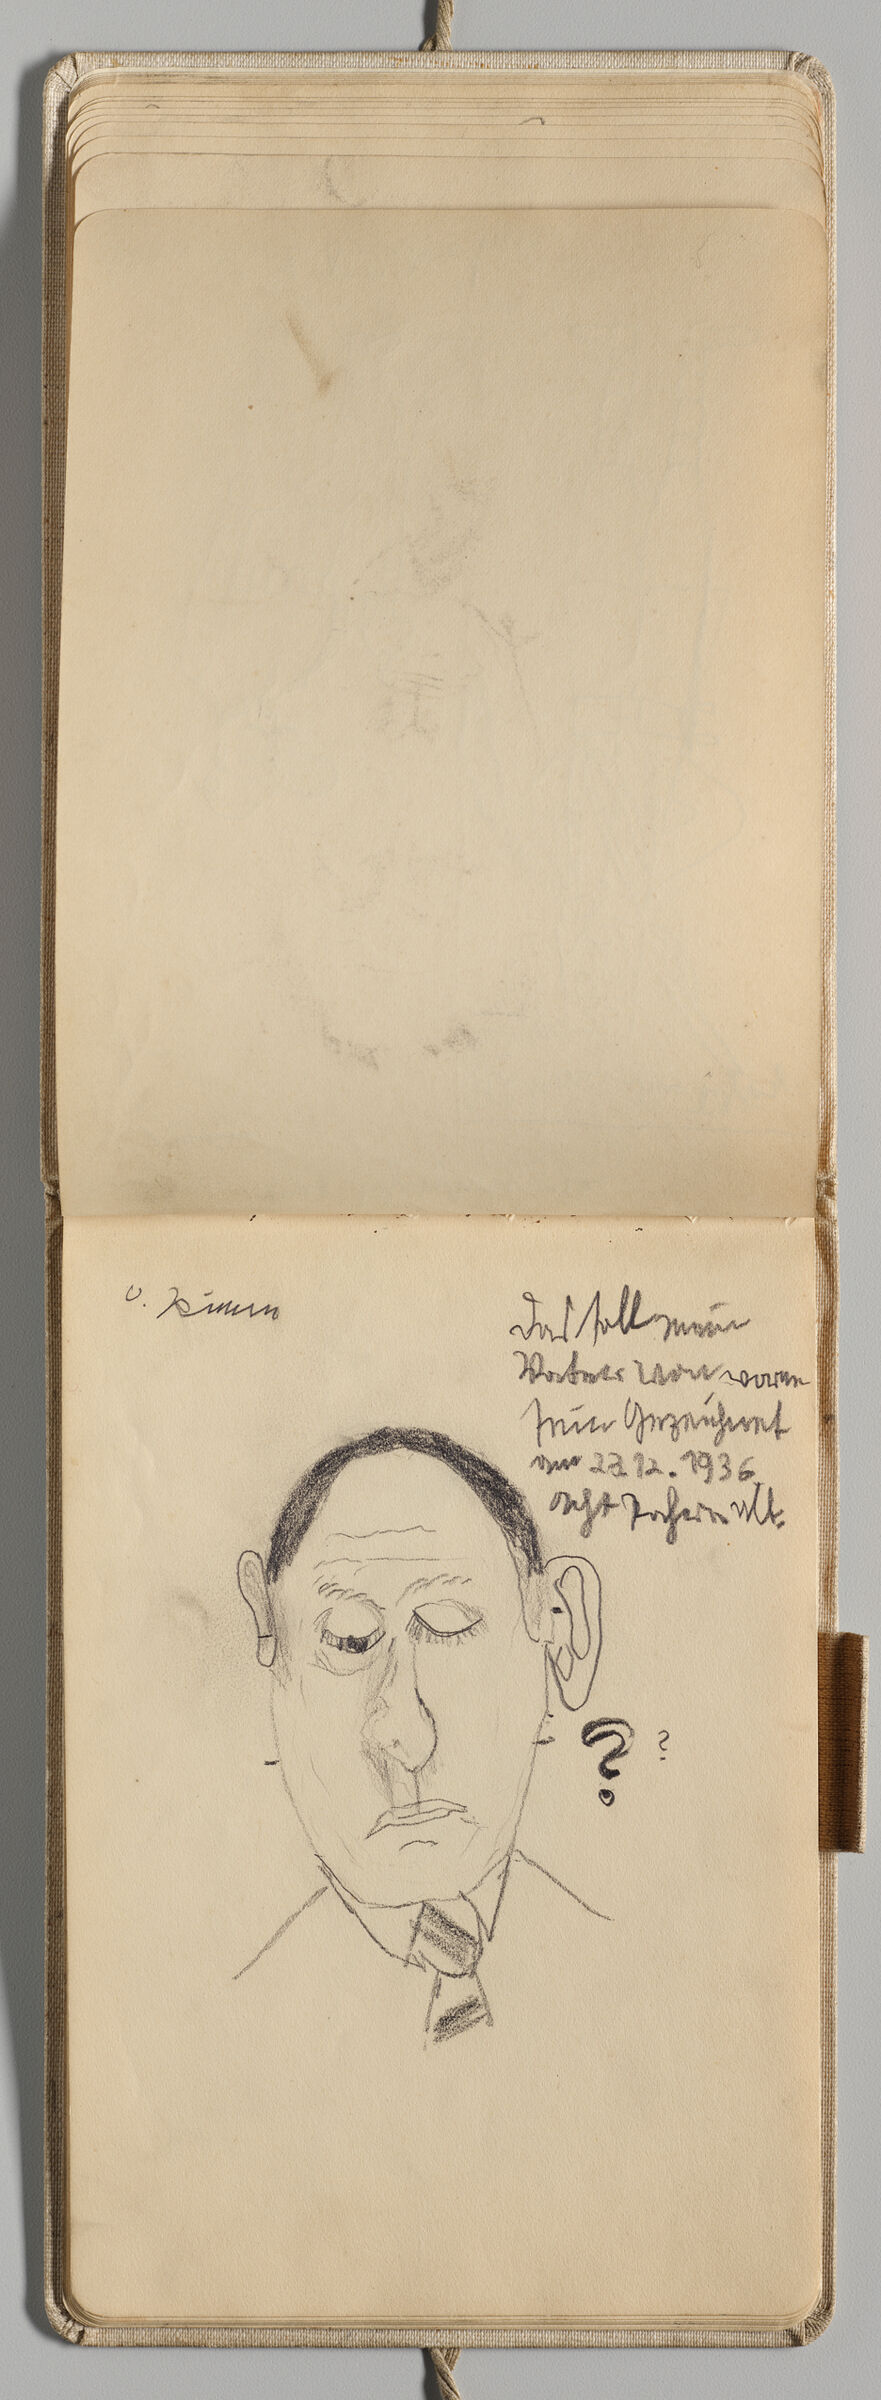 Untitled (Blank, Left Page); Untitled (Male Head With Eyes Closed Or Down-Turned, Right Page)